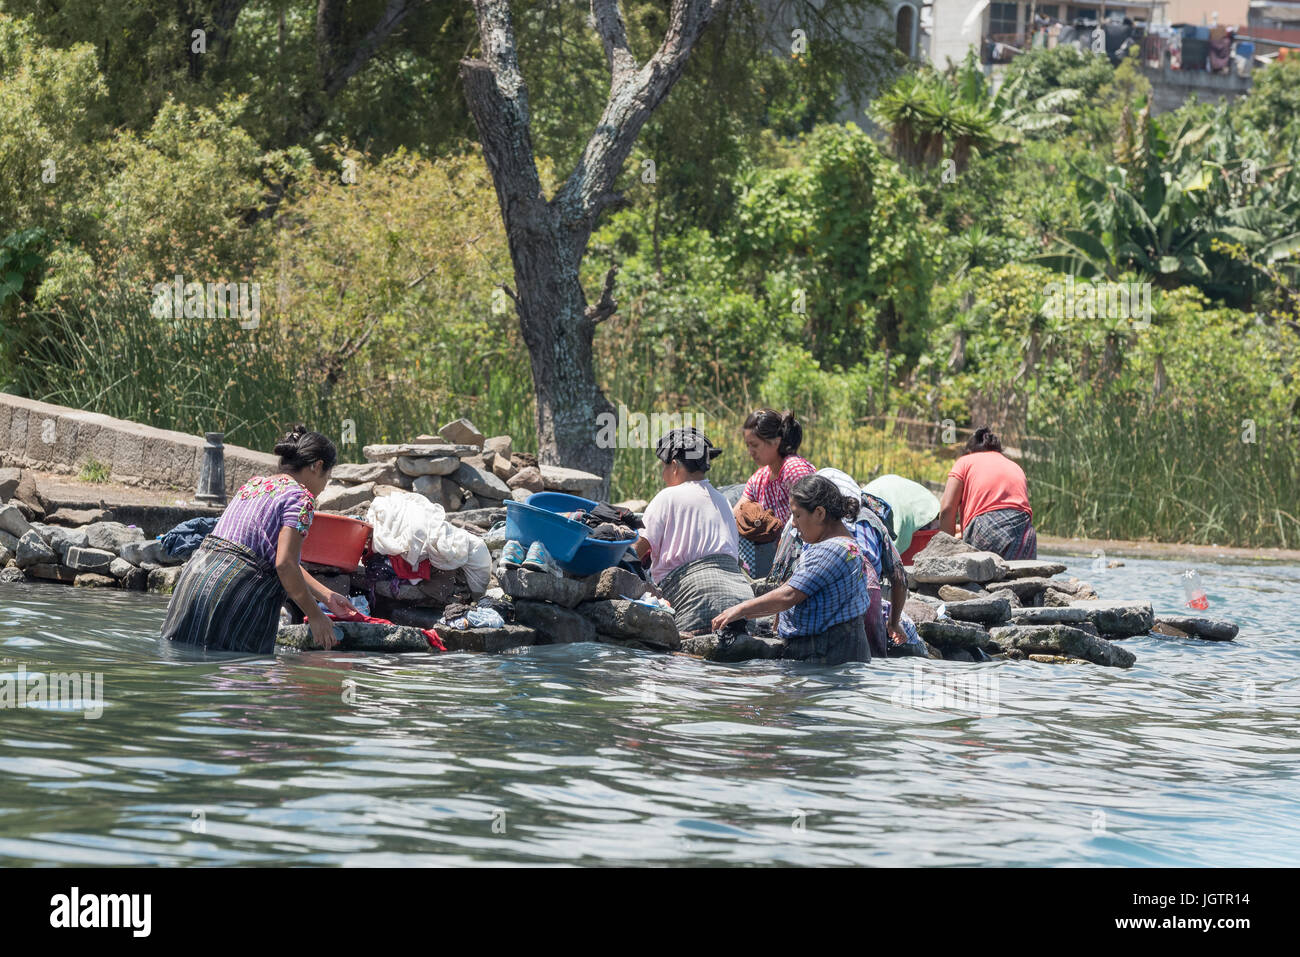 Several women of mixed ages in the typical native dress cleaning and washing clothes, Lake Atitlan,  Guatemala Stock Photo